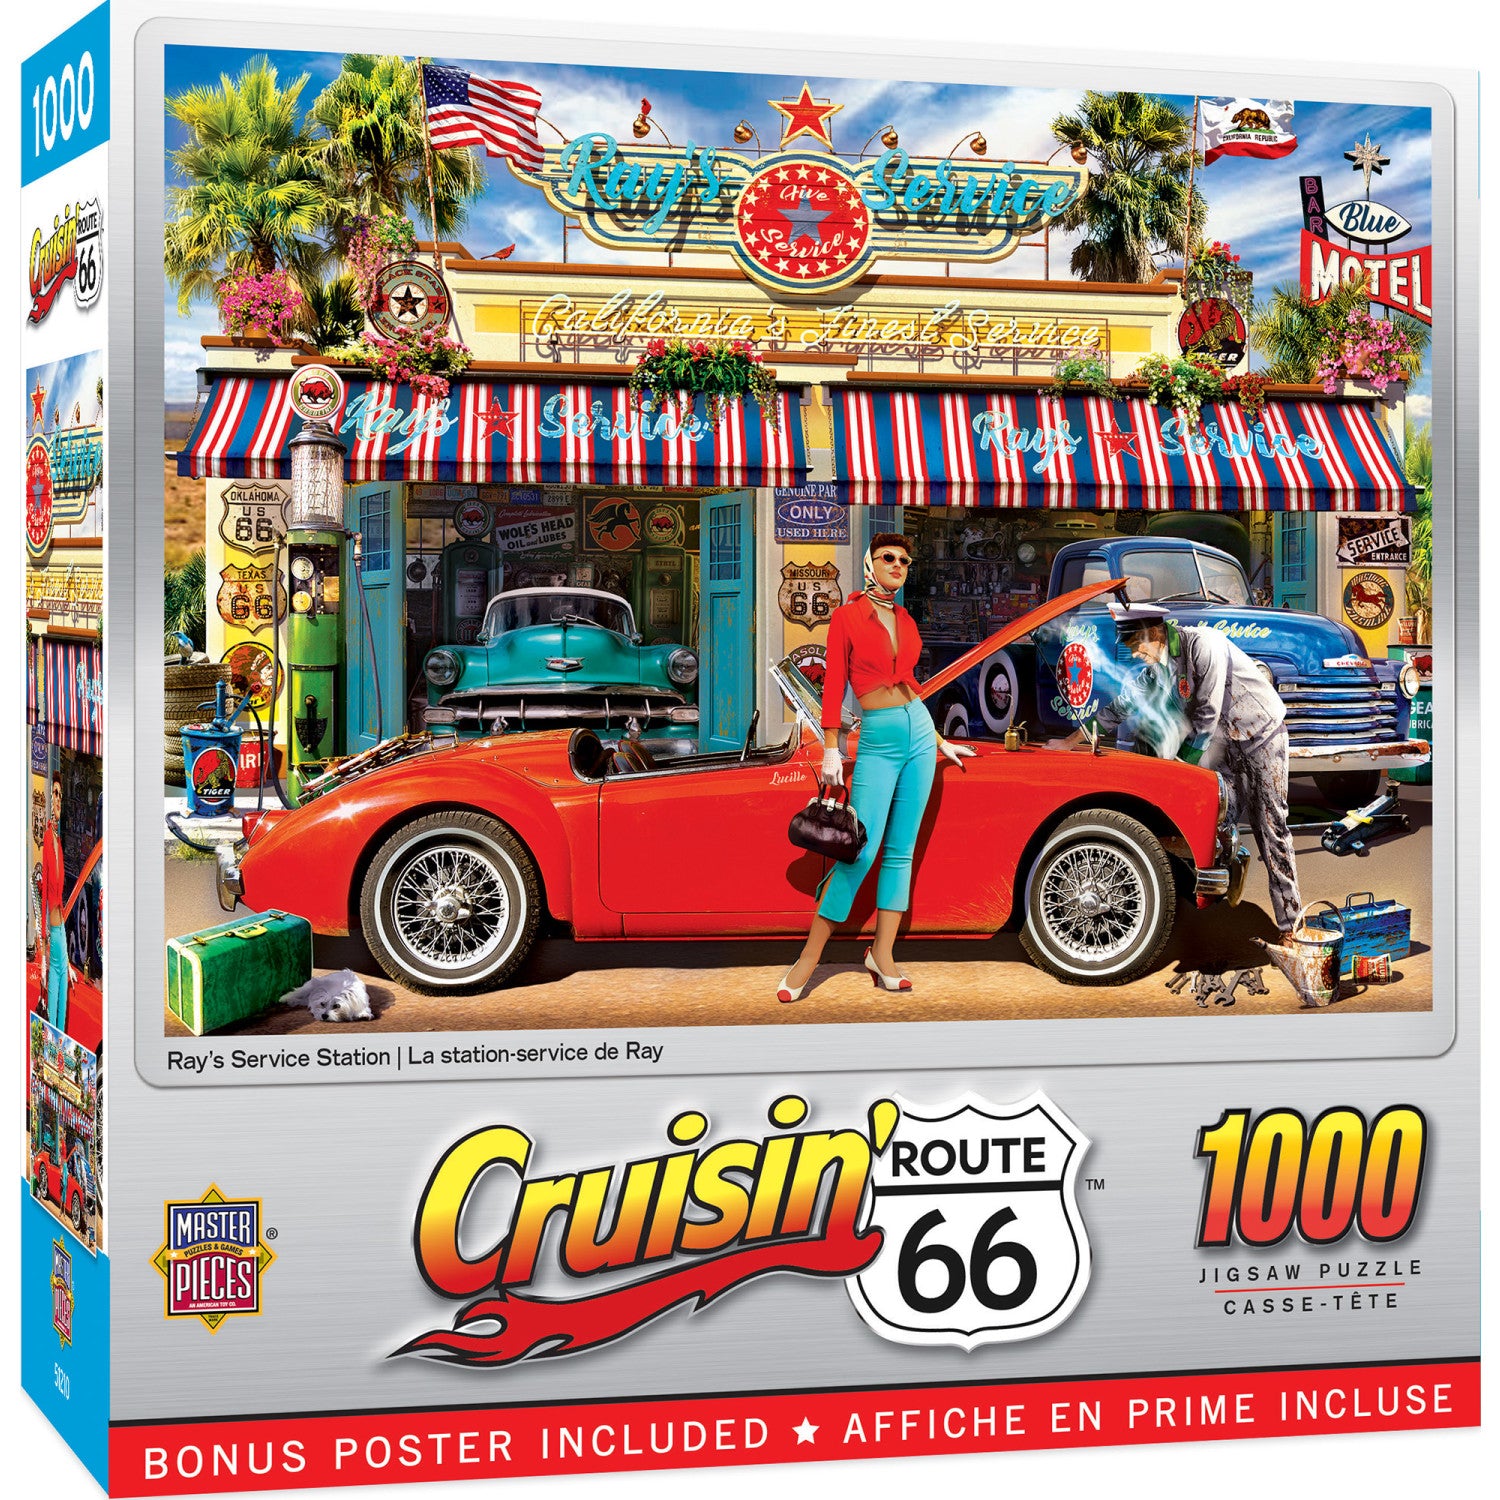 Cruisin' Route 66 - Ray's Service Station 1000 Piece Puzzle